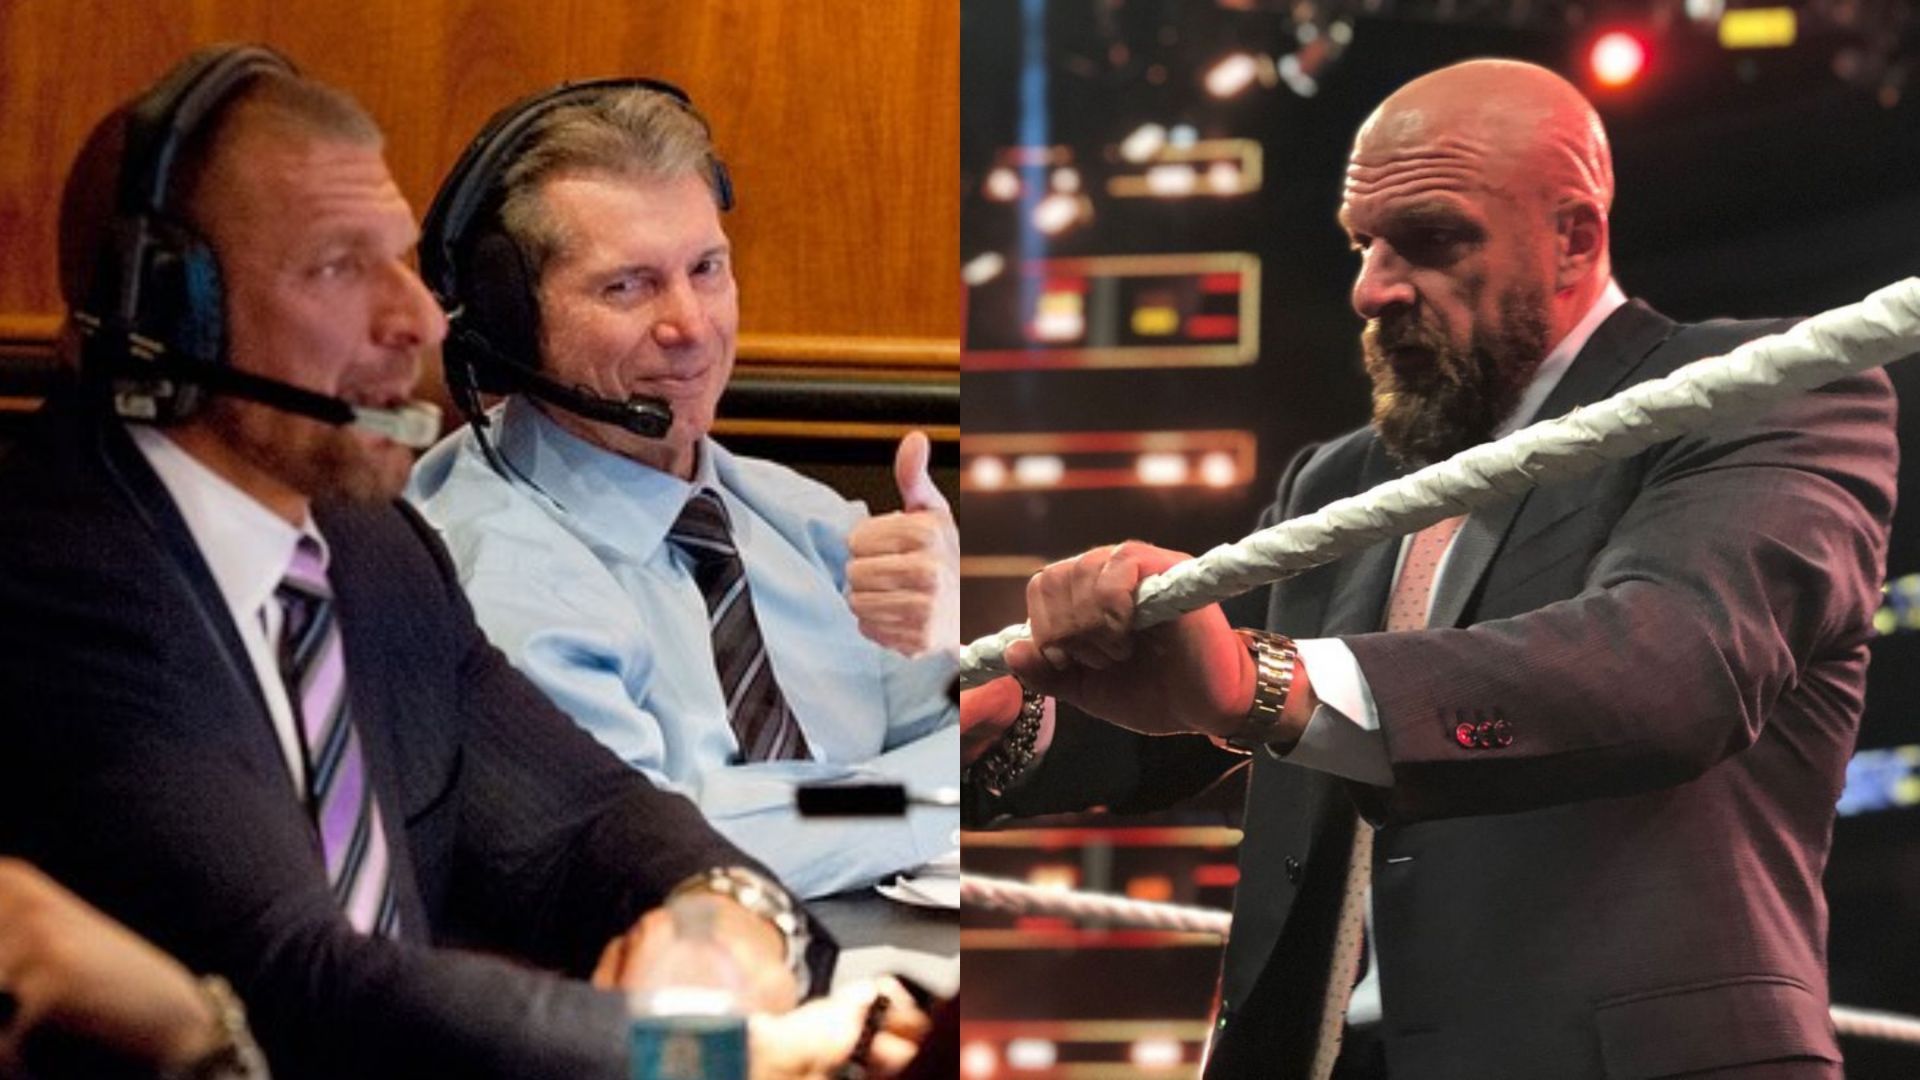 WWE Chief Content Officer Triple H and former TKO Executive Chairman Vince McMahon